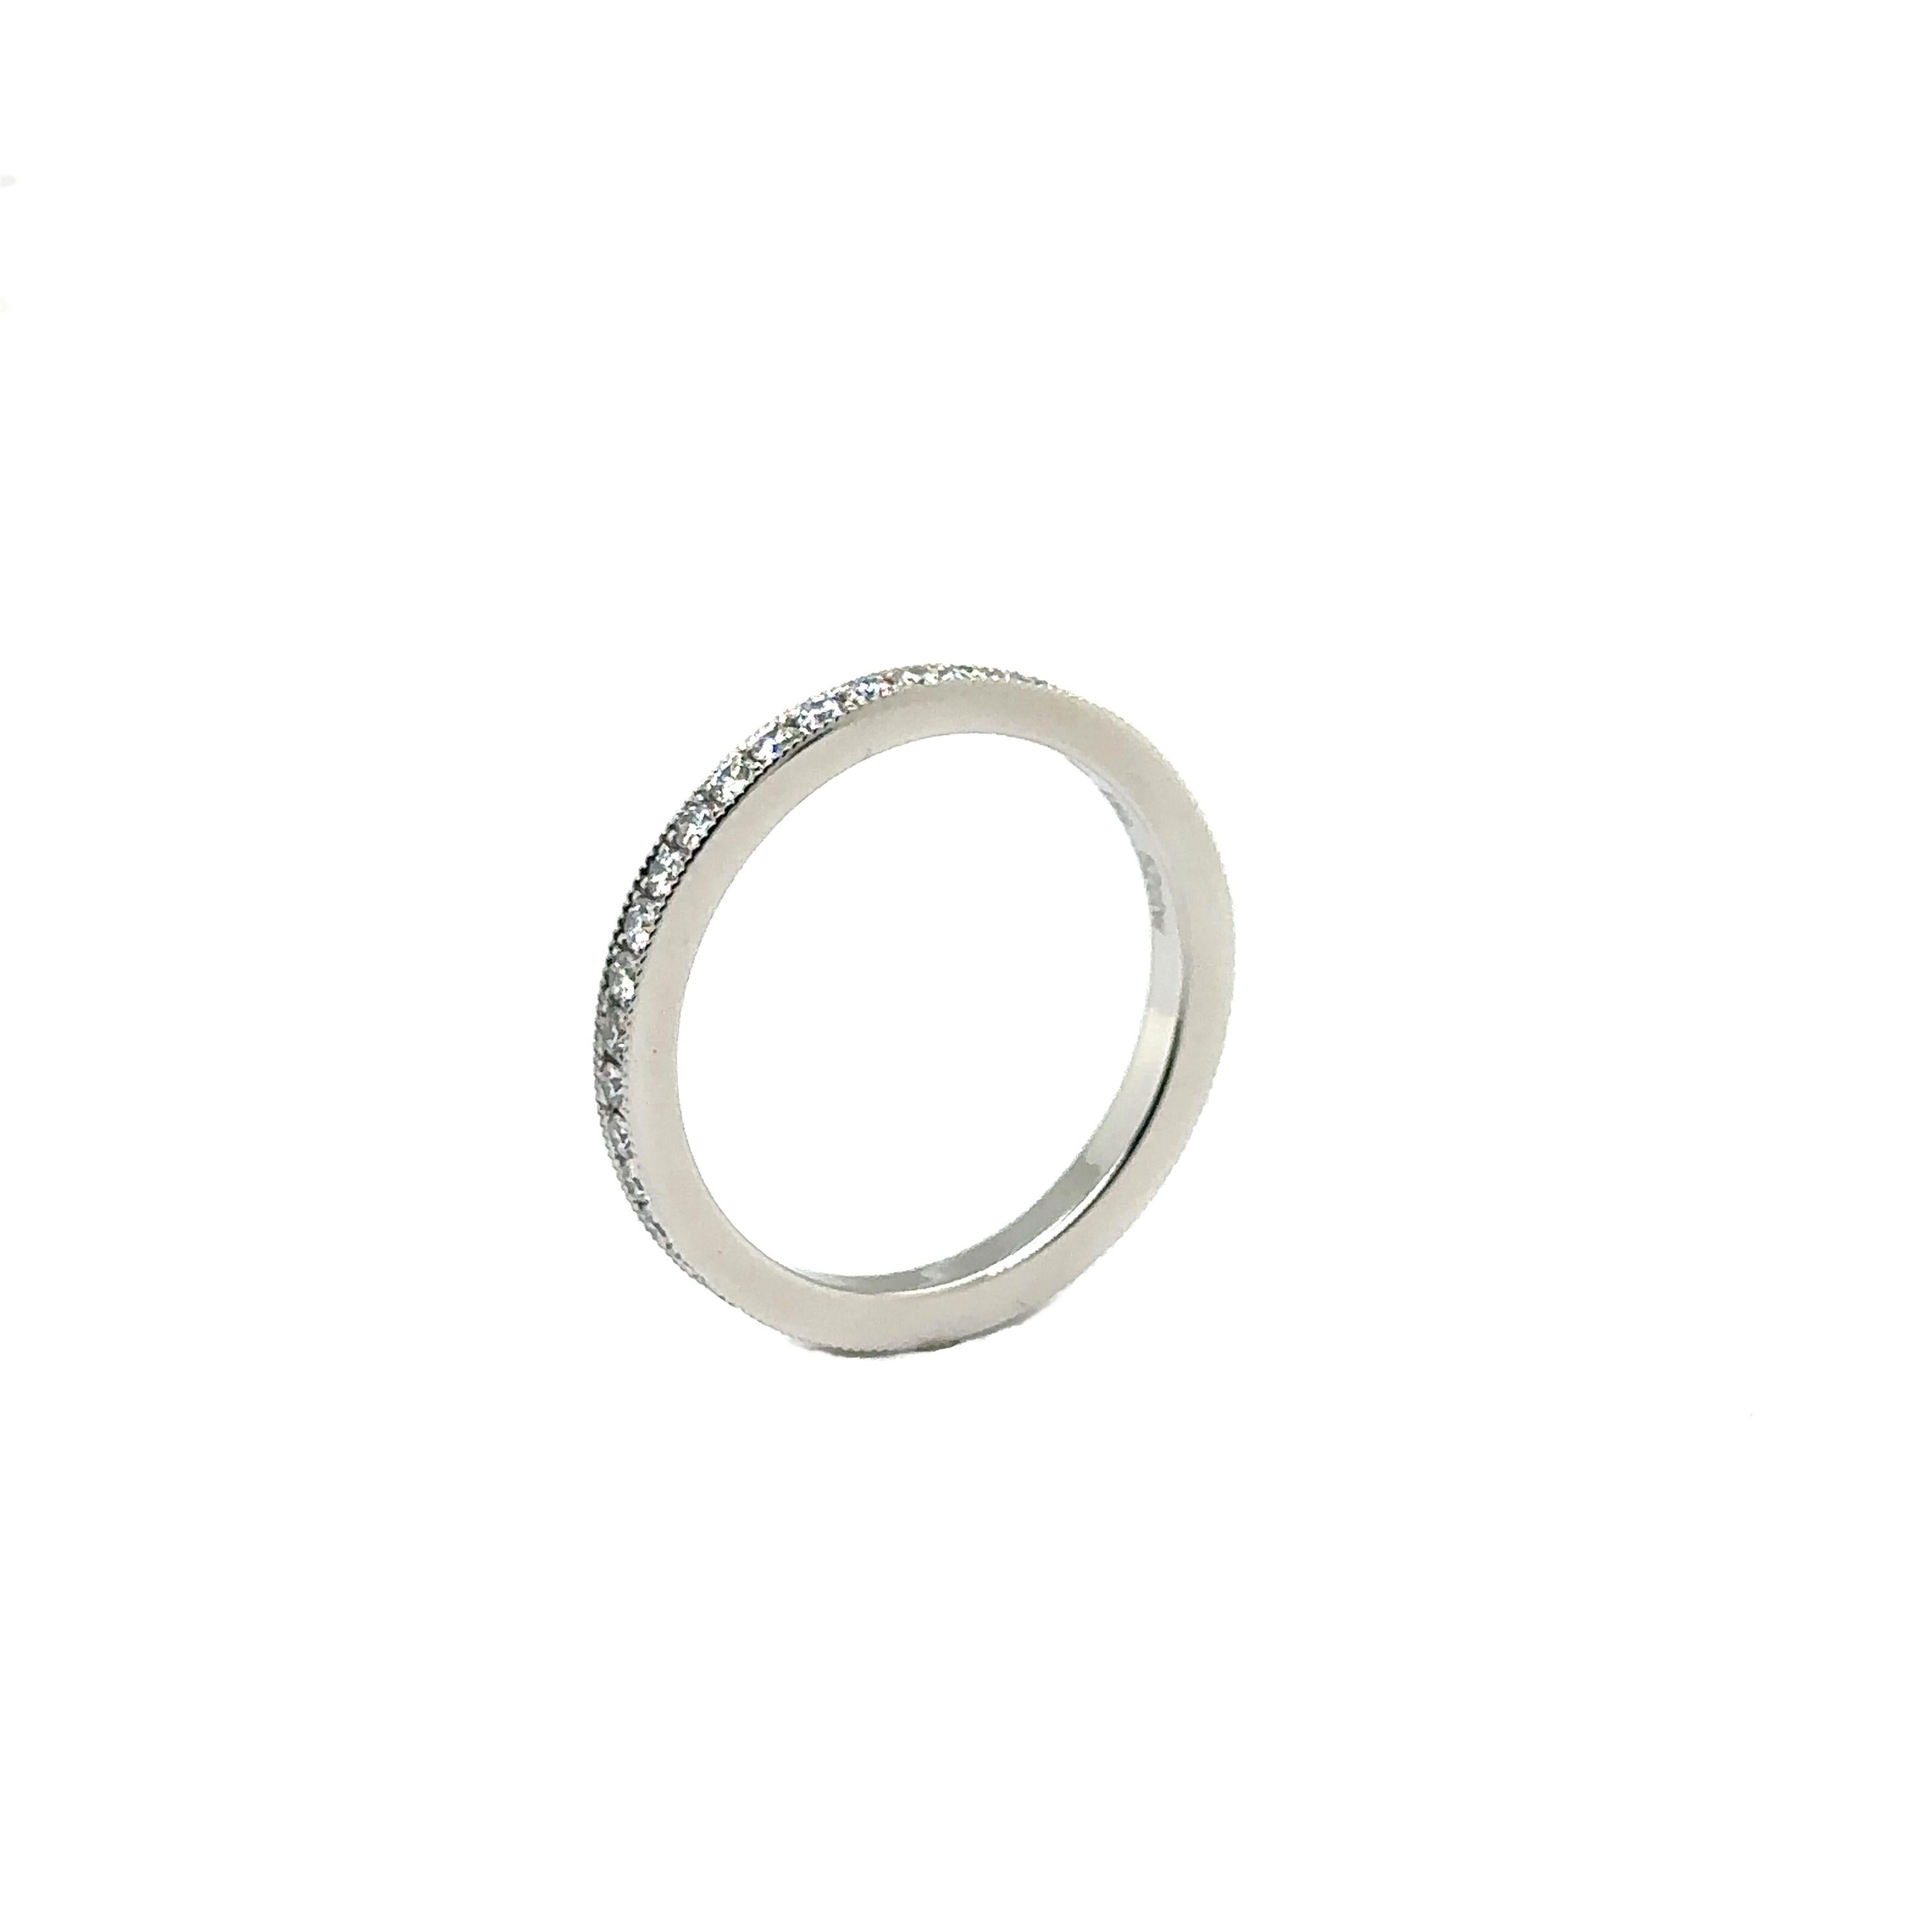 Women's WB-39-PLAT - PLATINUM WEDDING BAND with 0.52 CT DIAMONDS For Sale